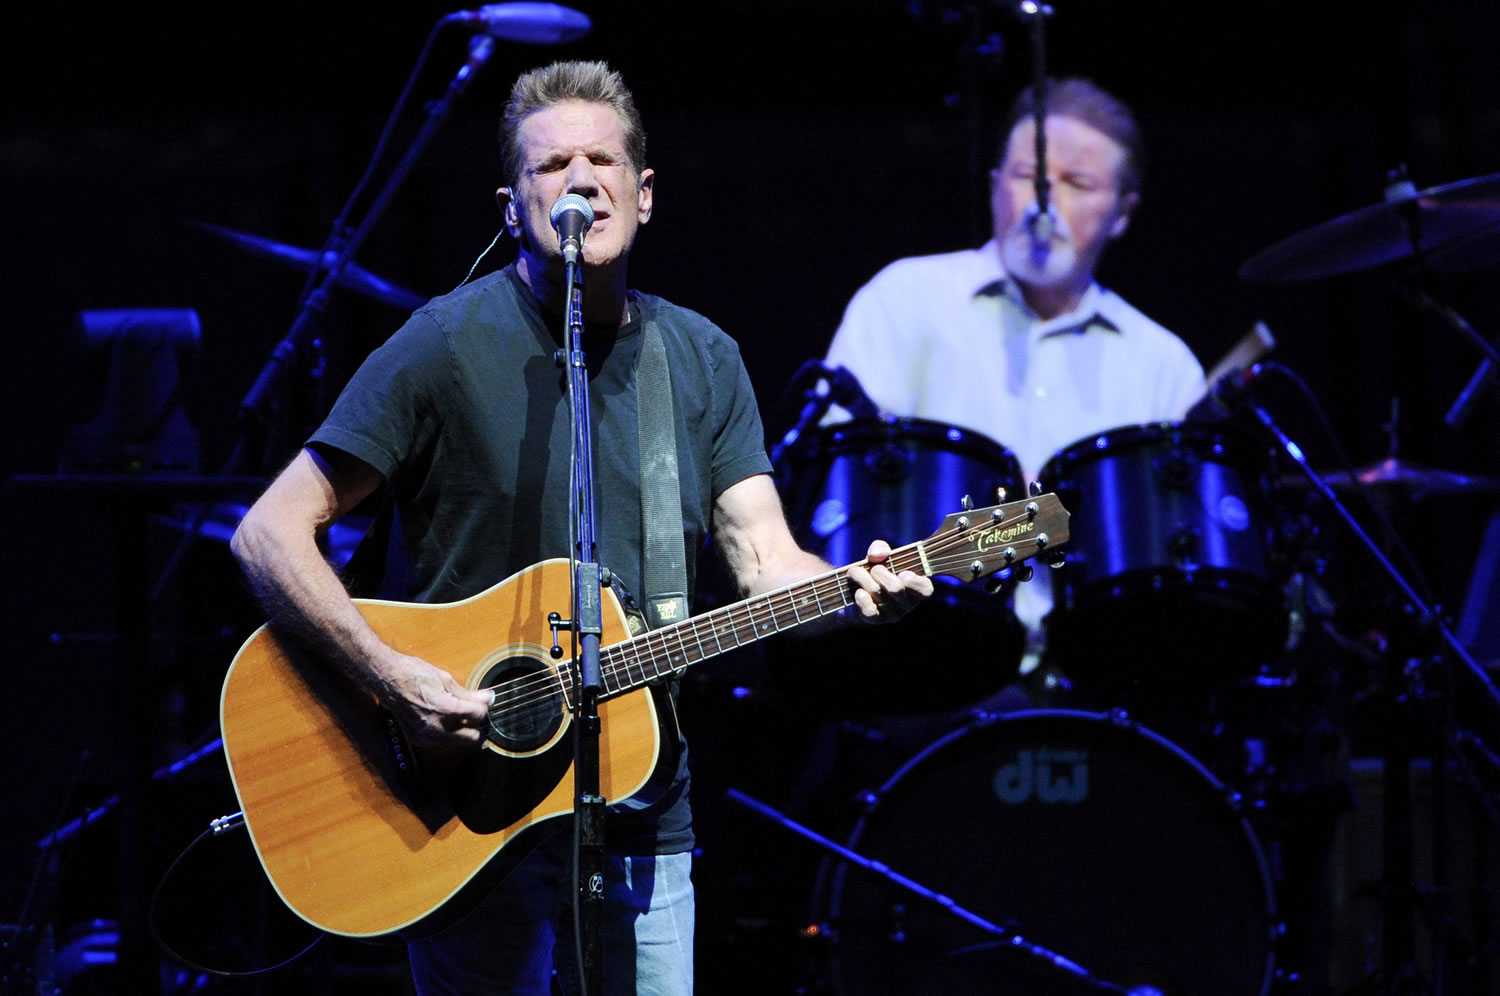 Musicians Glenn Frey, left, and Don Henley of the Eagles perform in 2013 at Madison Square Garden in New York. Frey, who co-founded the Eagles, died Monday at age 67.